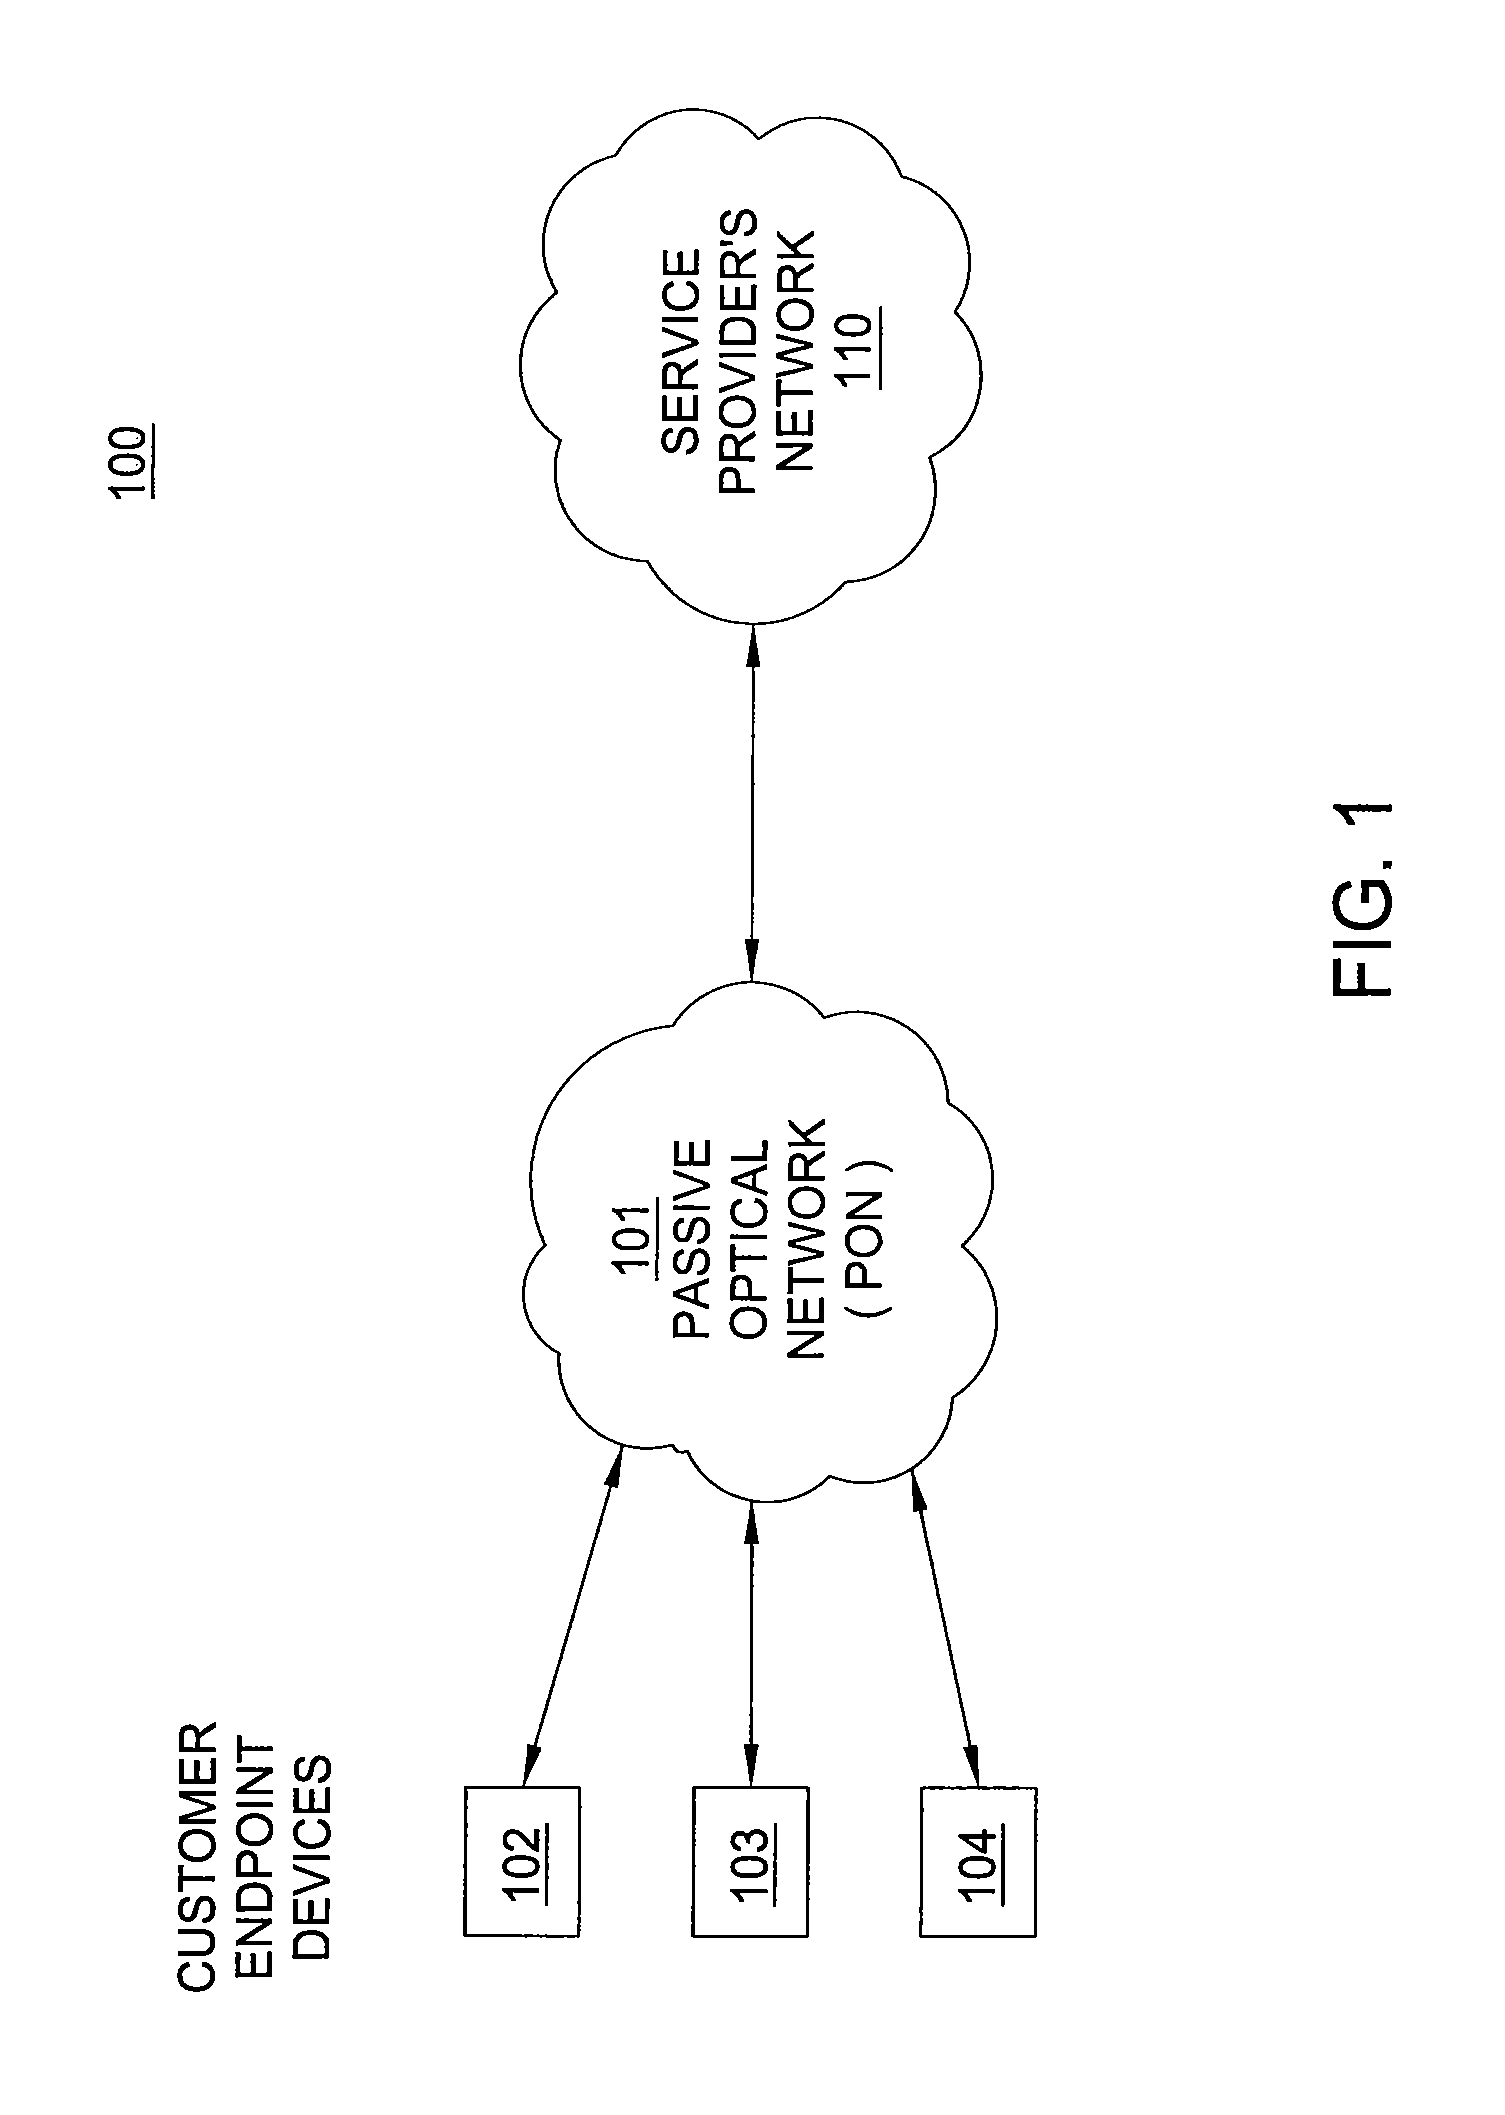 Method and apparatus for enabling multiple optical line termination devices to share a feeder fiber